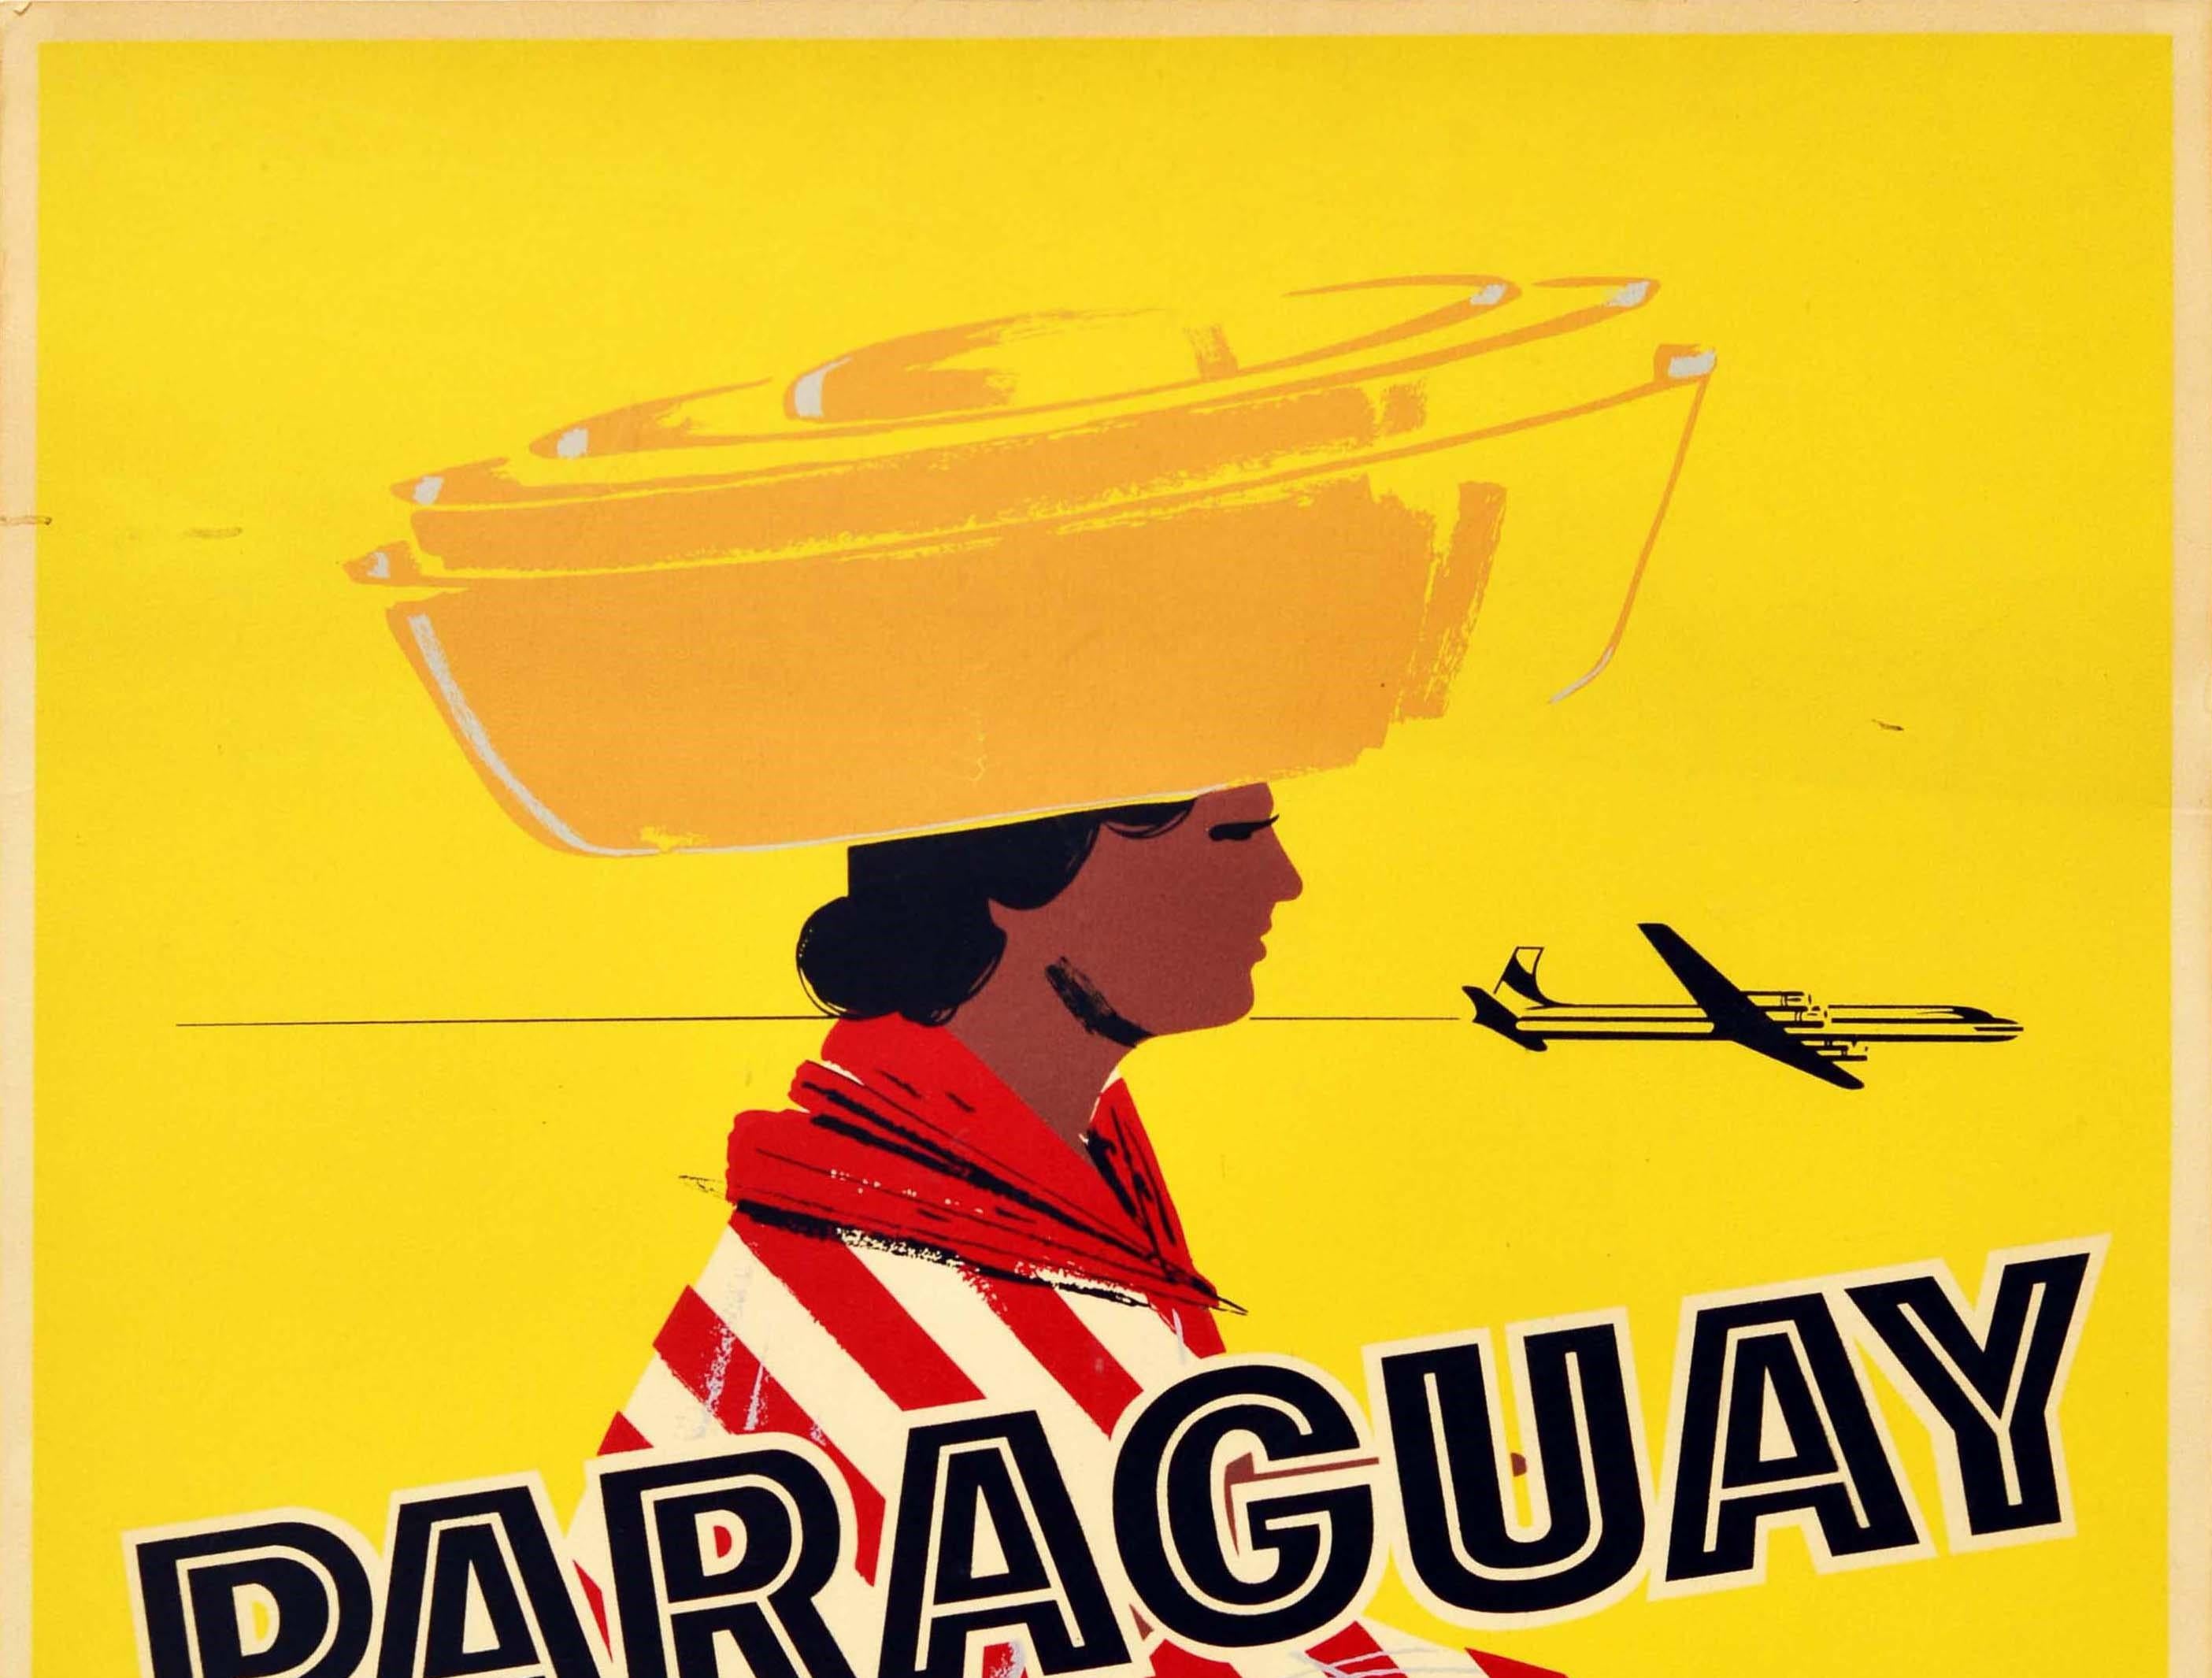 Original Vintage Poster For Paraguay Braniff Airways South America Travel Design - Print by Unknown